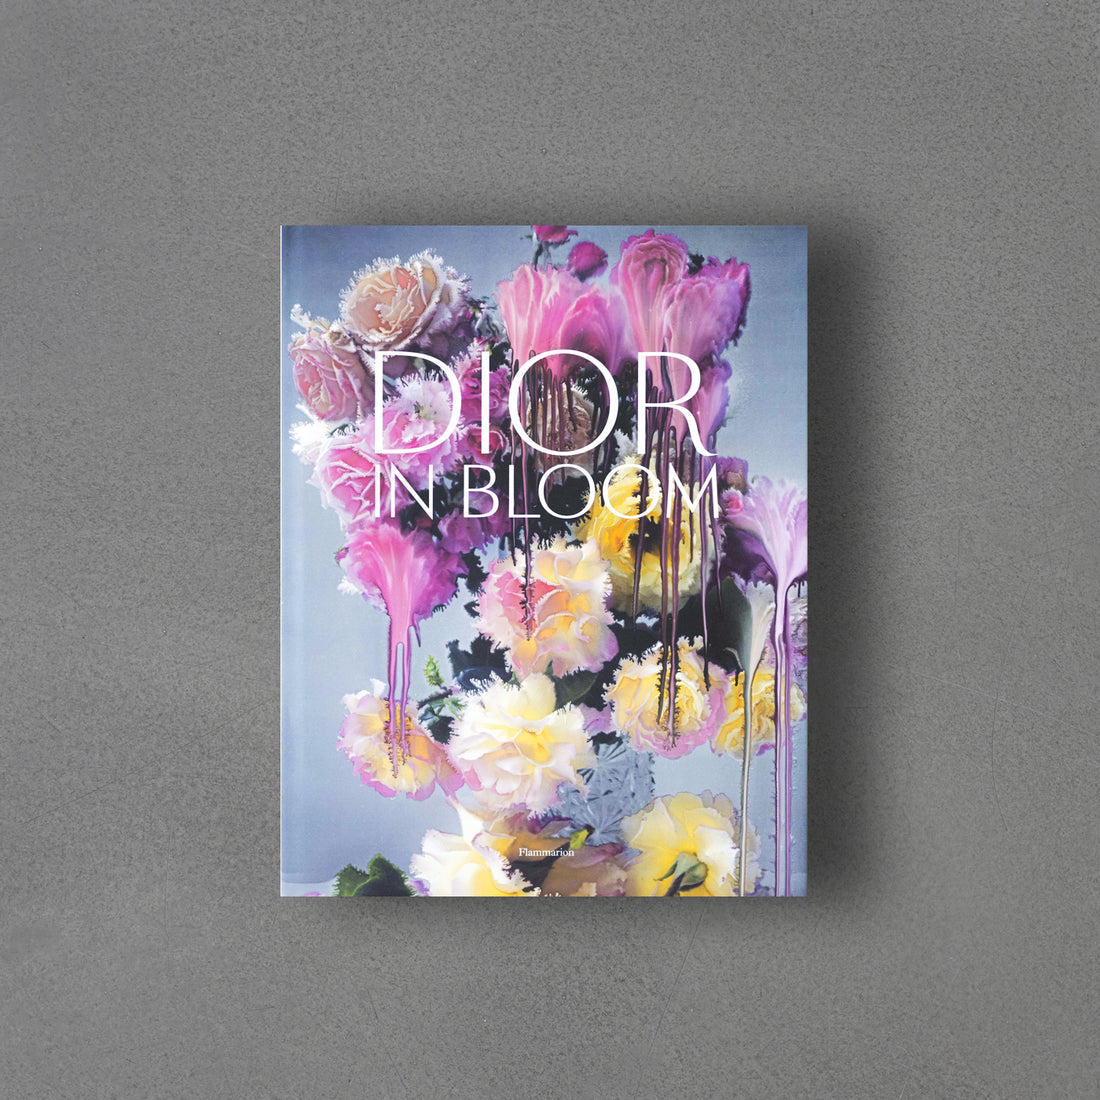 Dior in Bloom